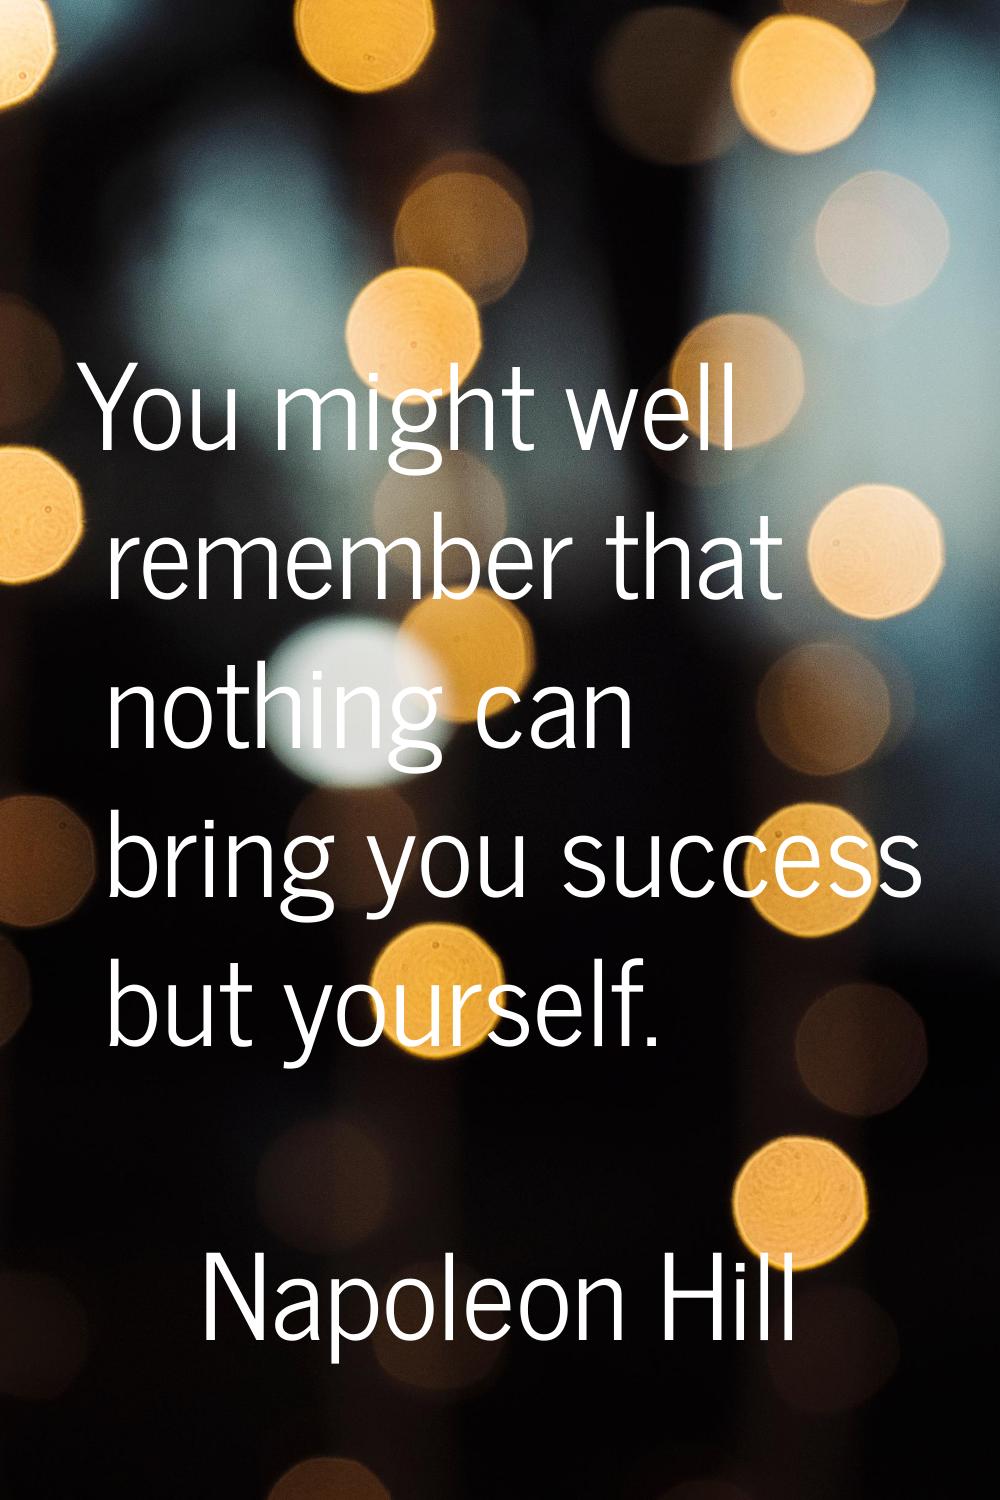 You might well remember that nothing can bring you success but yourself.